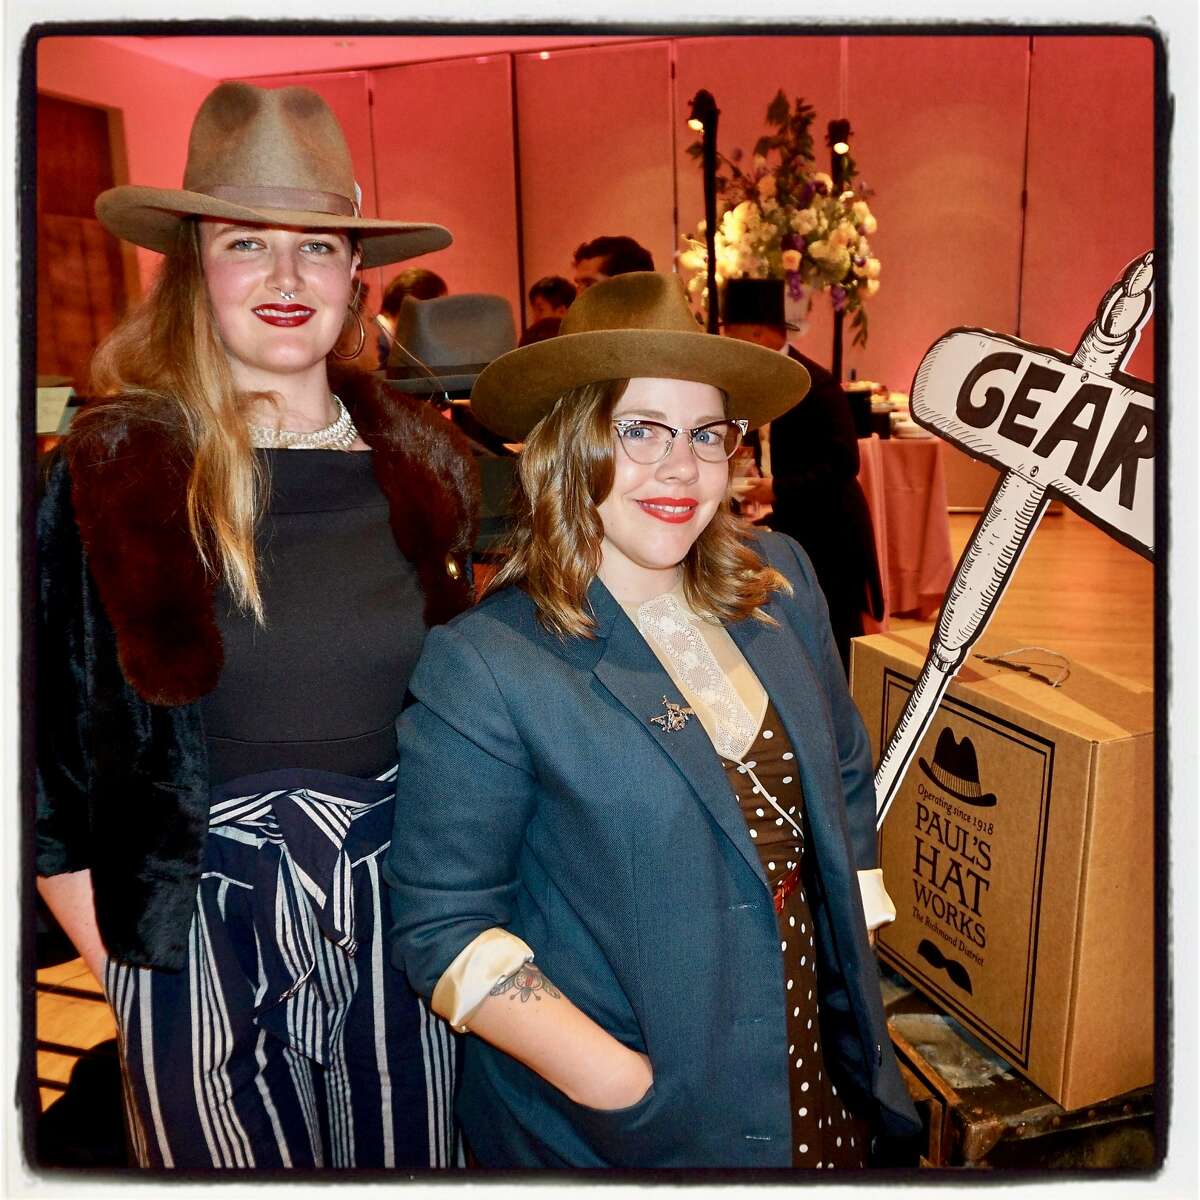 Paul's Hat Works staffers Clarkie Kabler (left) and Desiree Ammons at the Legion of Honor. June 22, 2017.